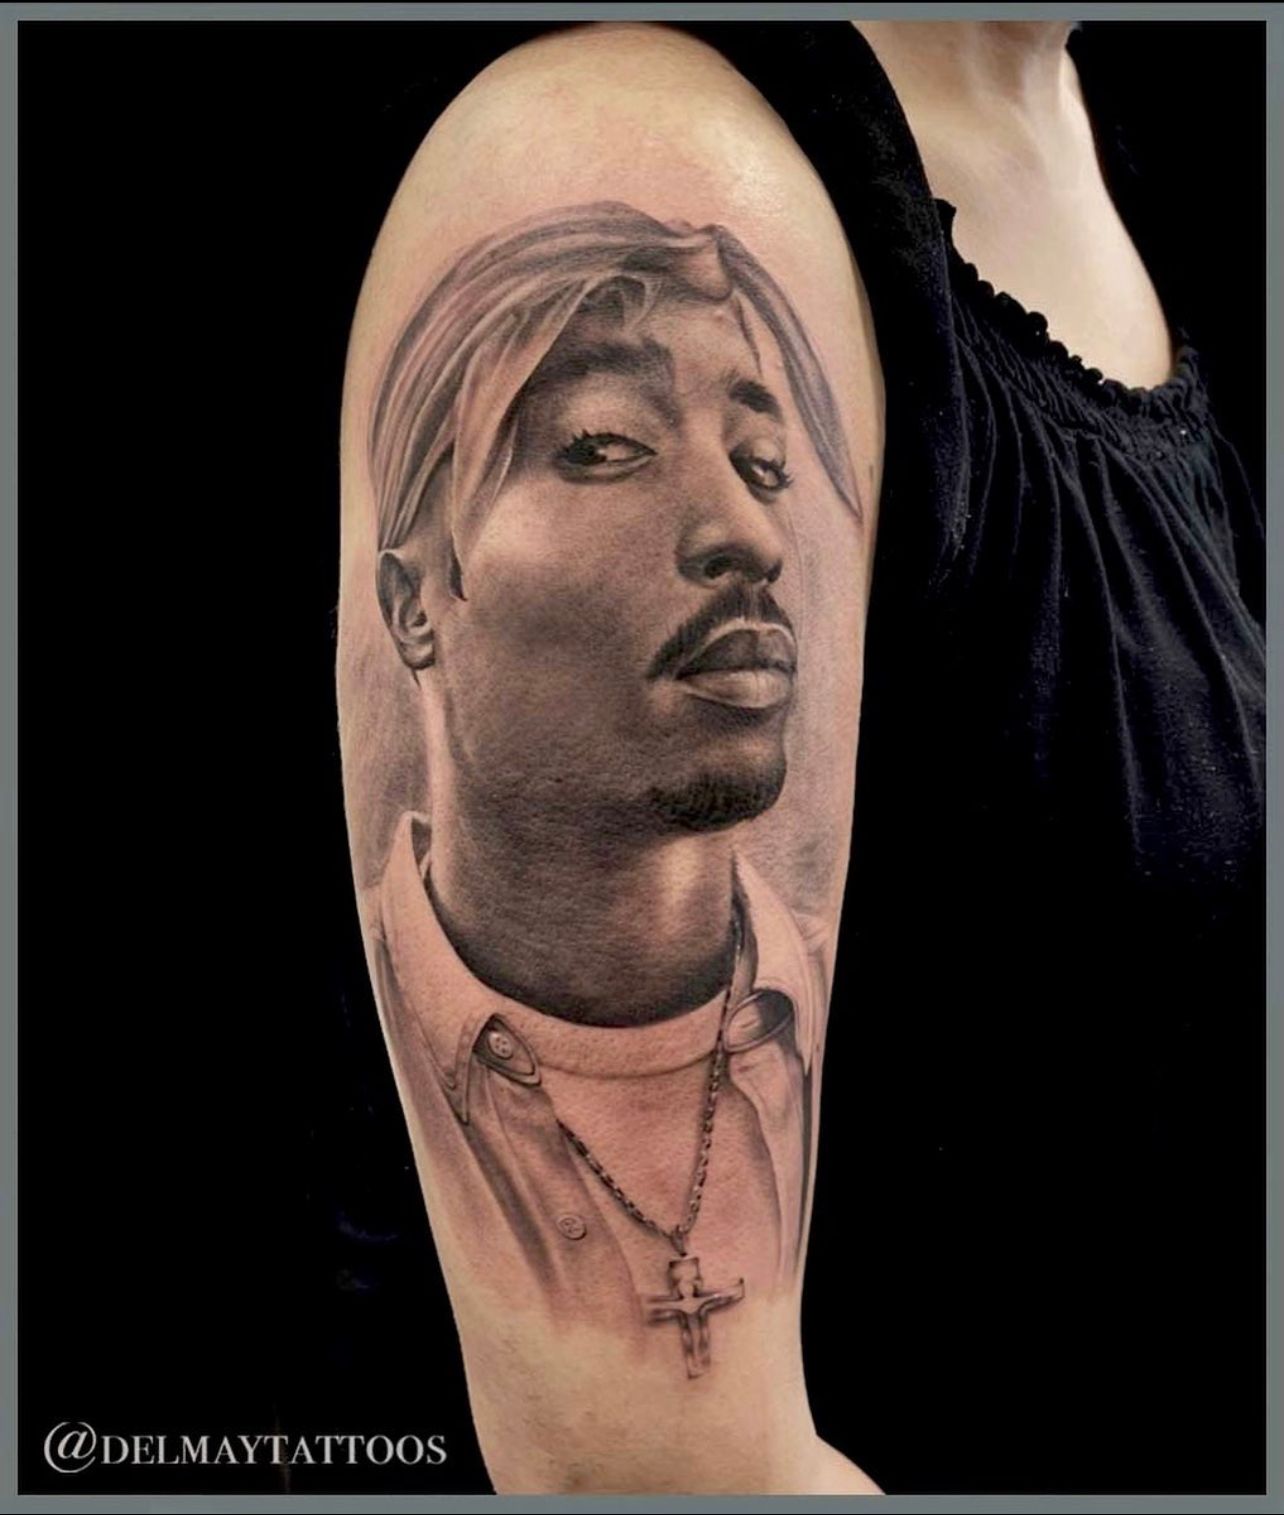 Incredible Tupac Portrait Tattoo  The detail on this Tupac tattoo is  incredible  By UNILAD Sound  Facebook